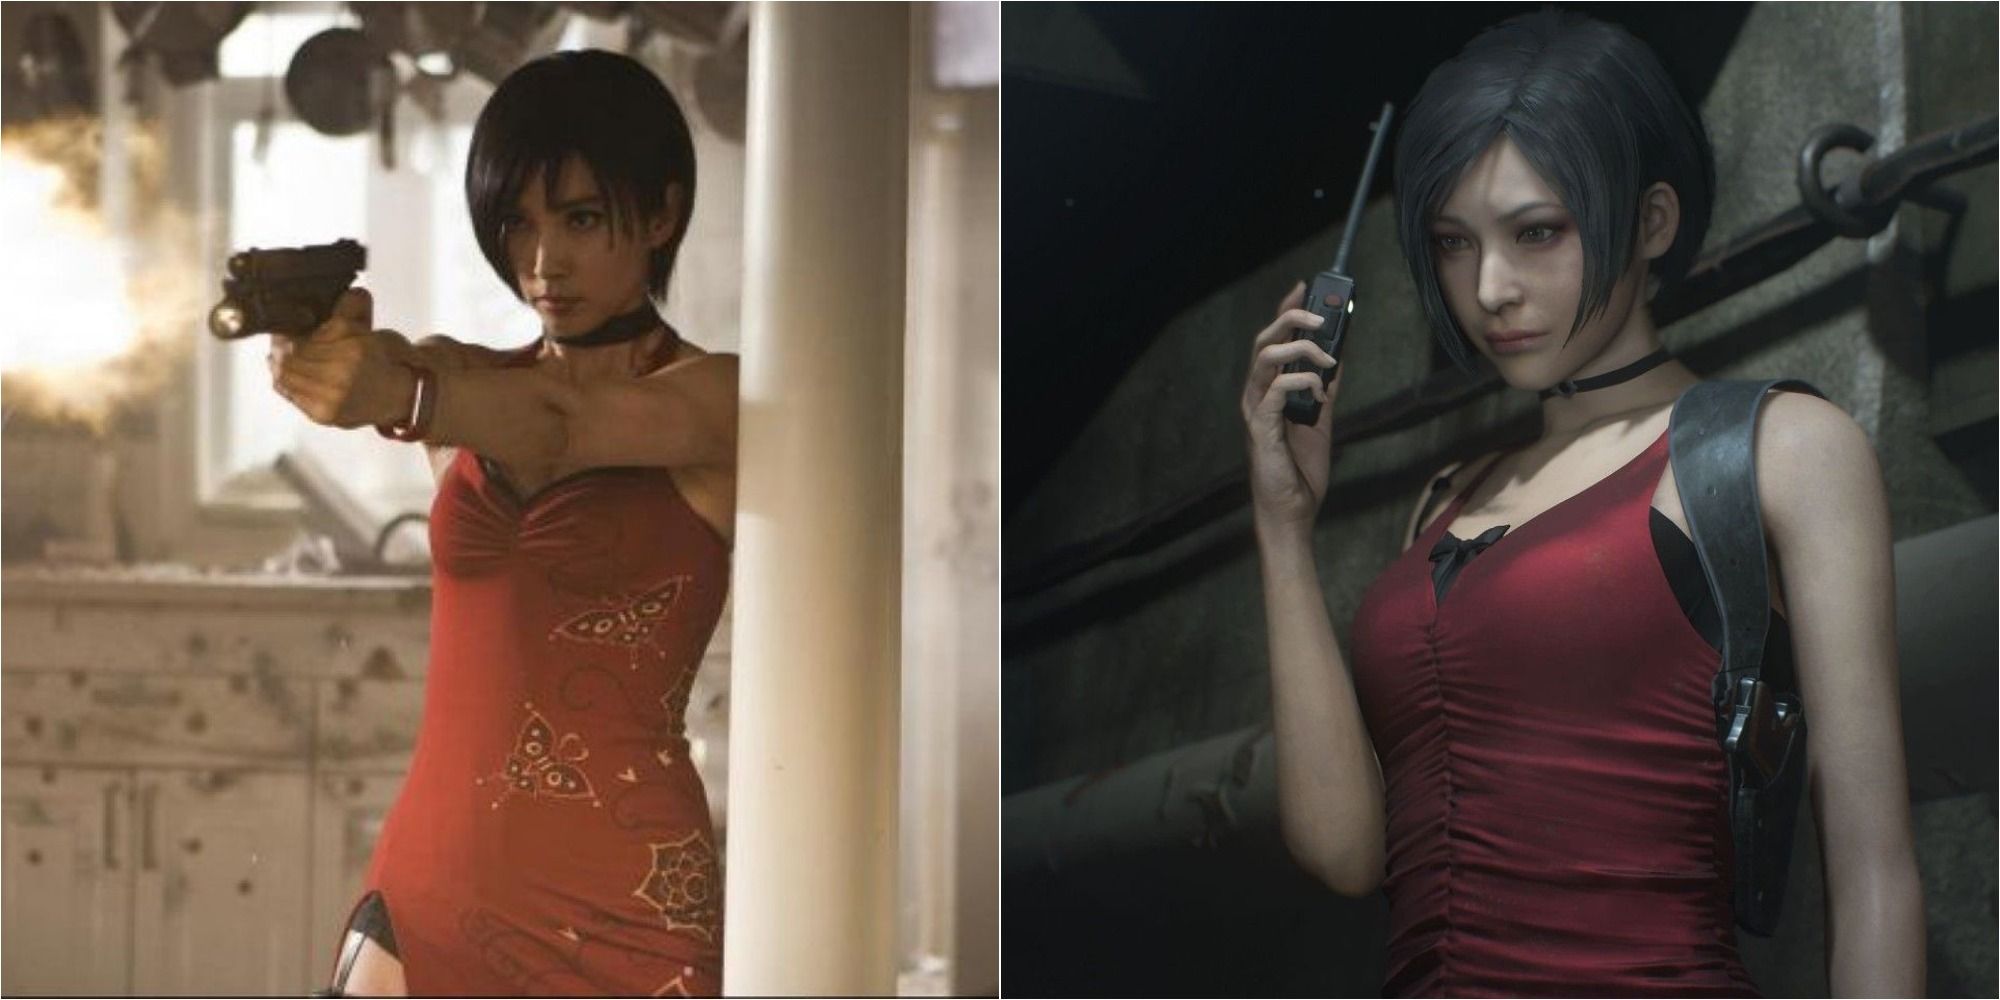 Resident Evil Ada Wong Split Image Of Live-Action Movie And Game